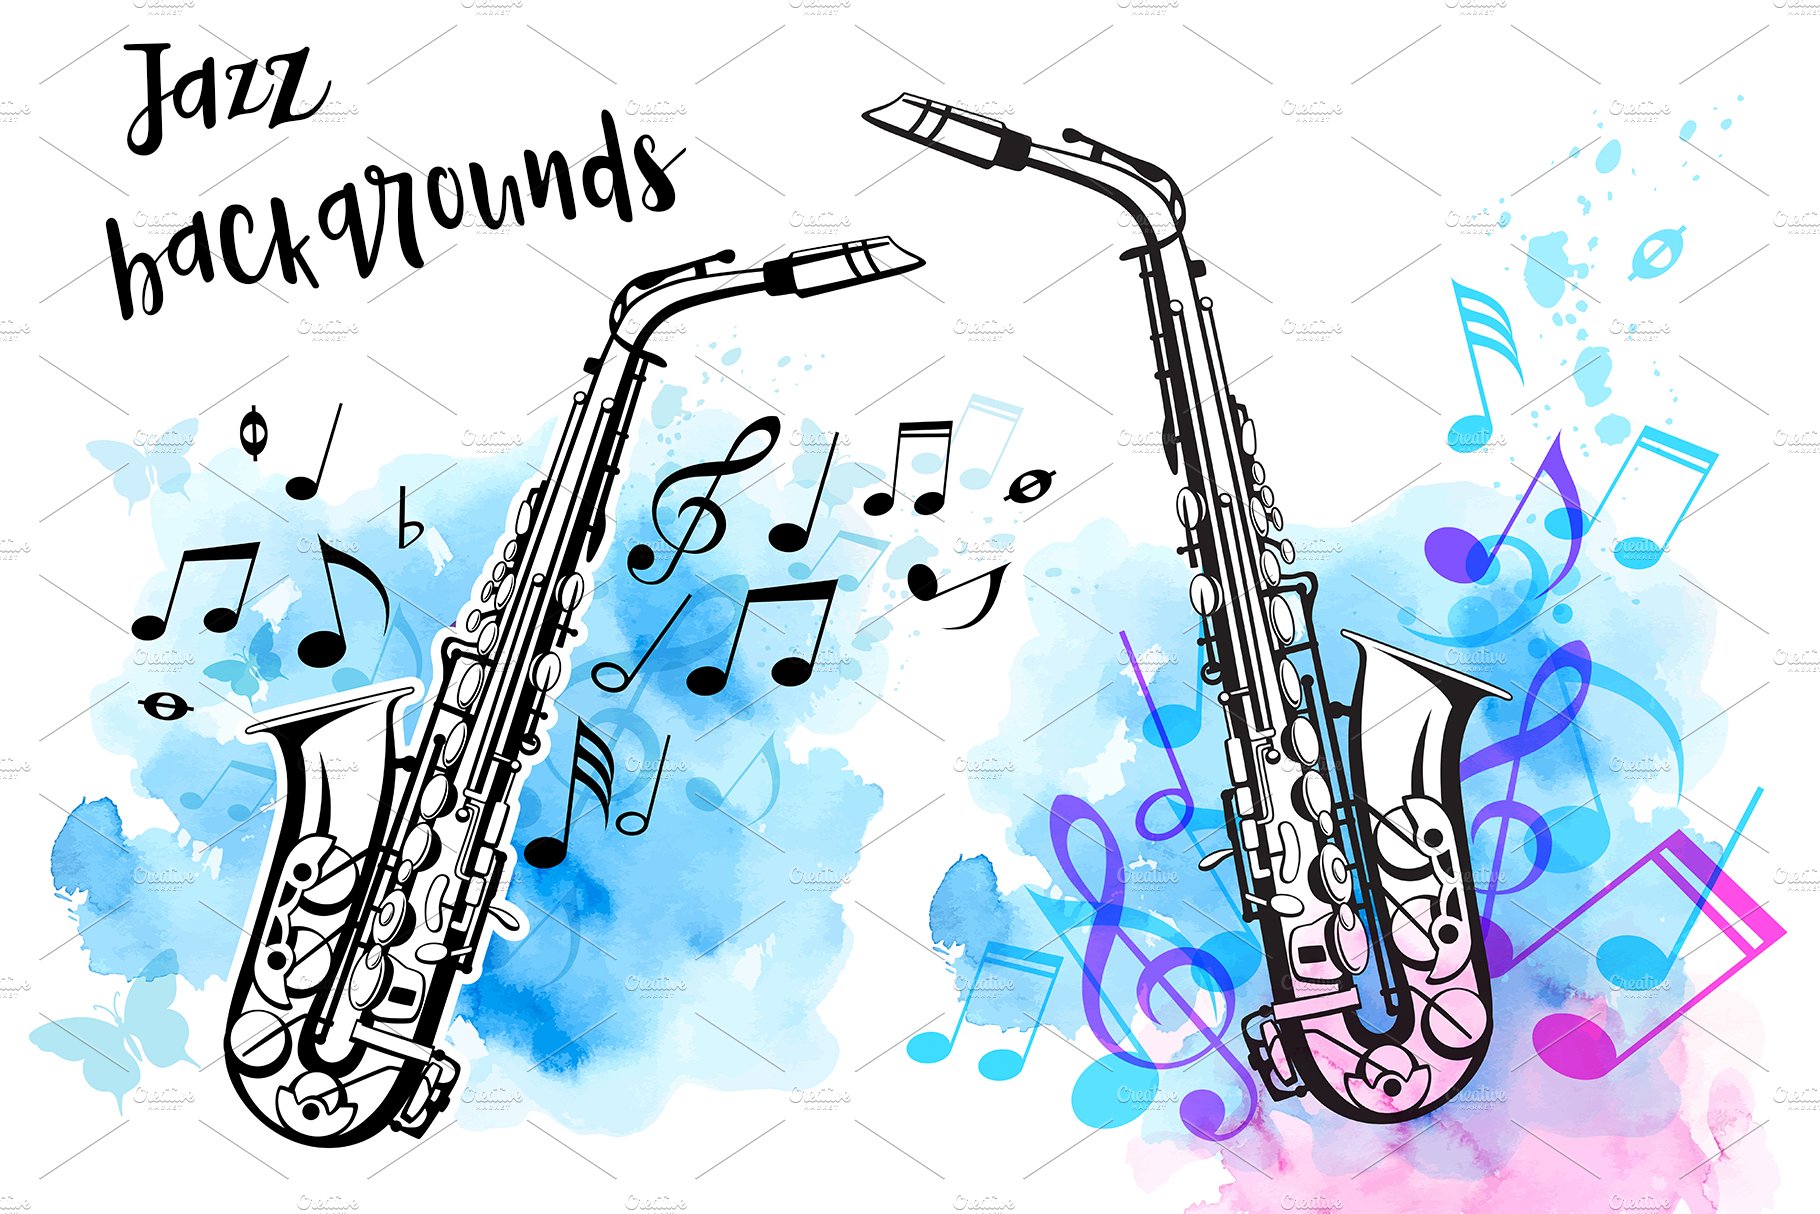 Jazz Music Backgrounds cover image.